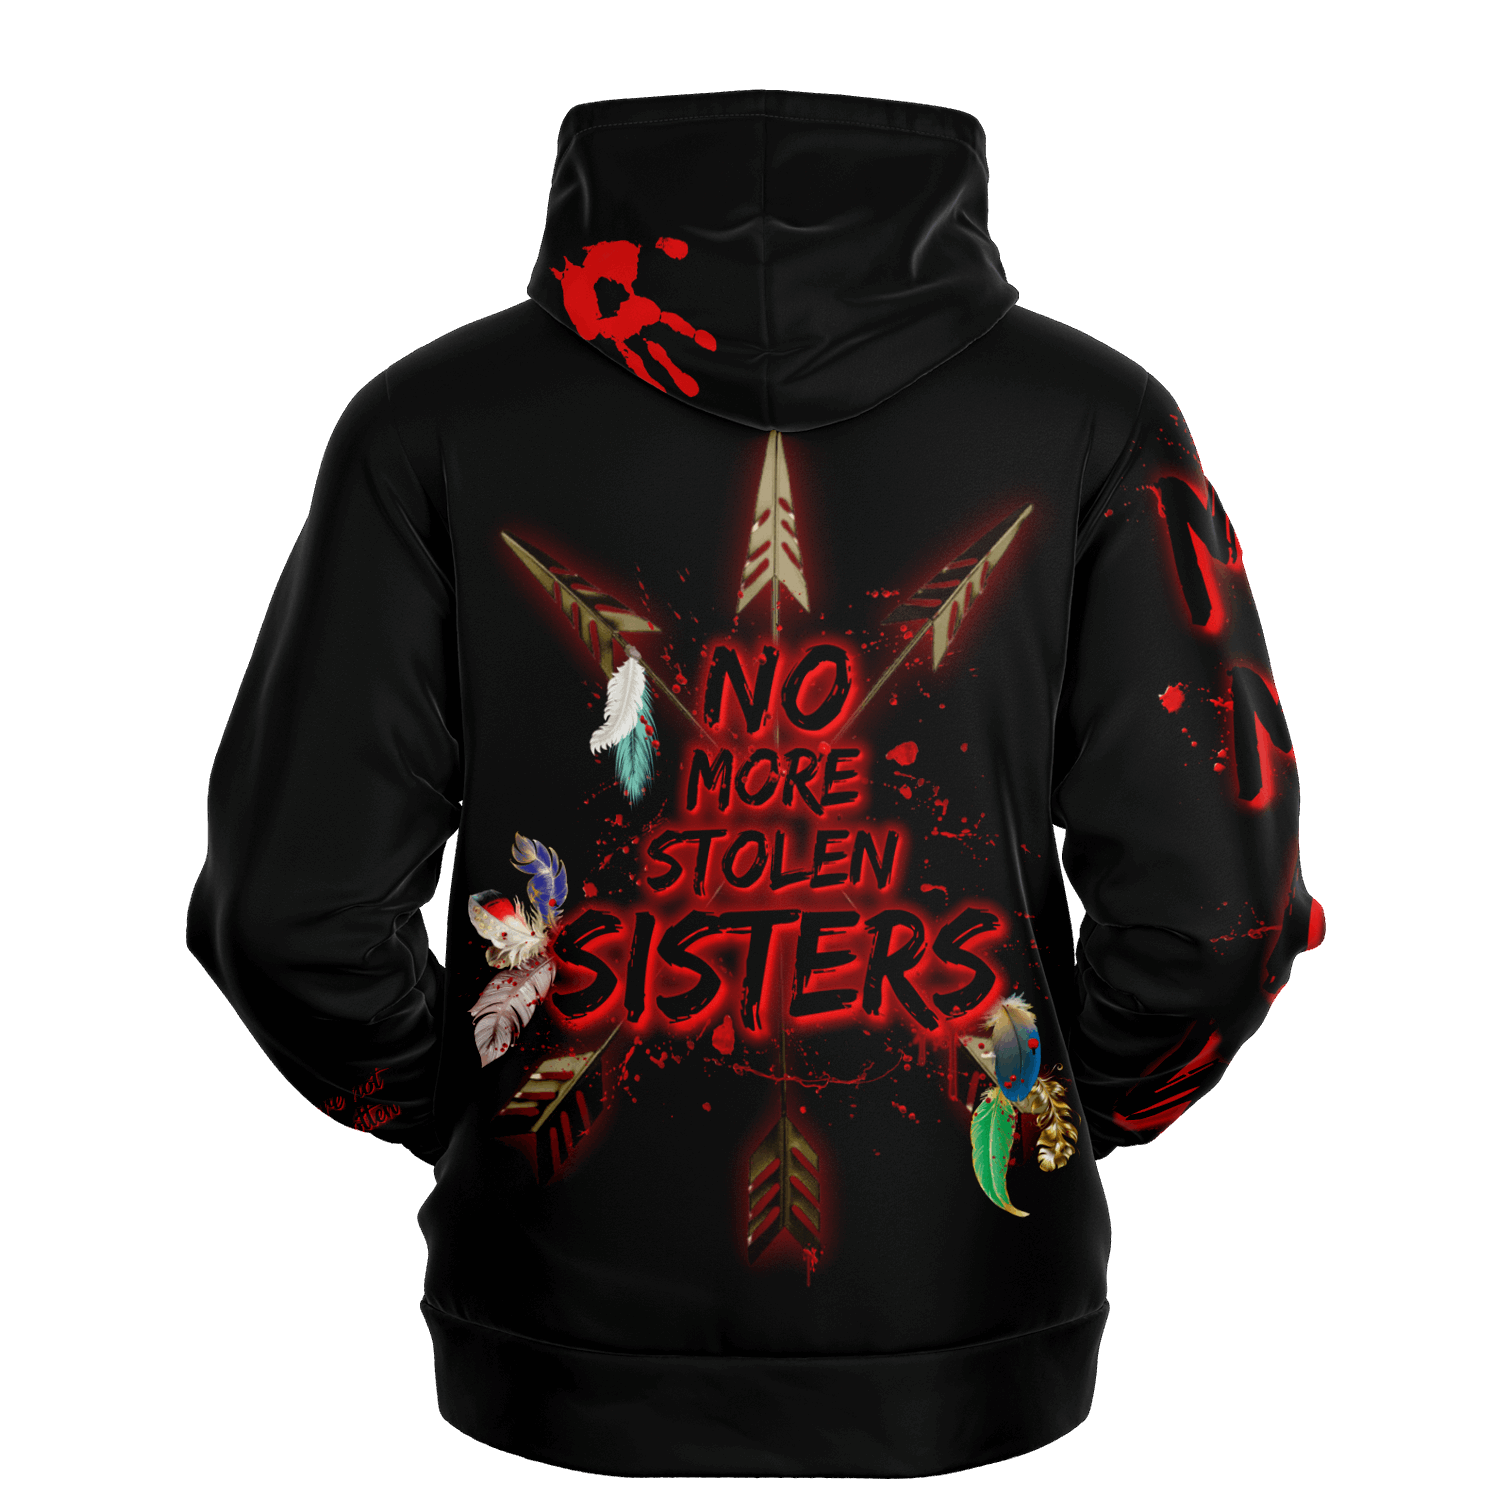 Murdered and Missing Indigenous Women back facing hoodie